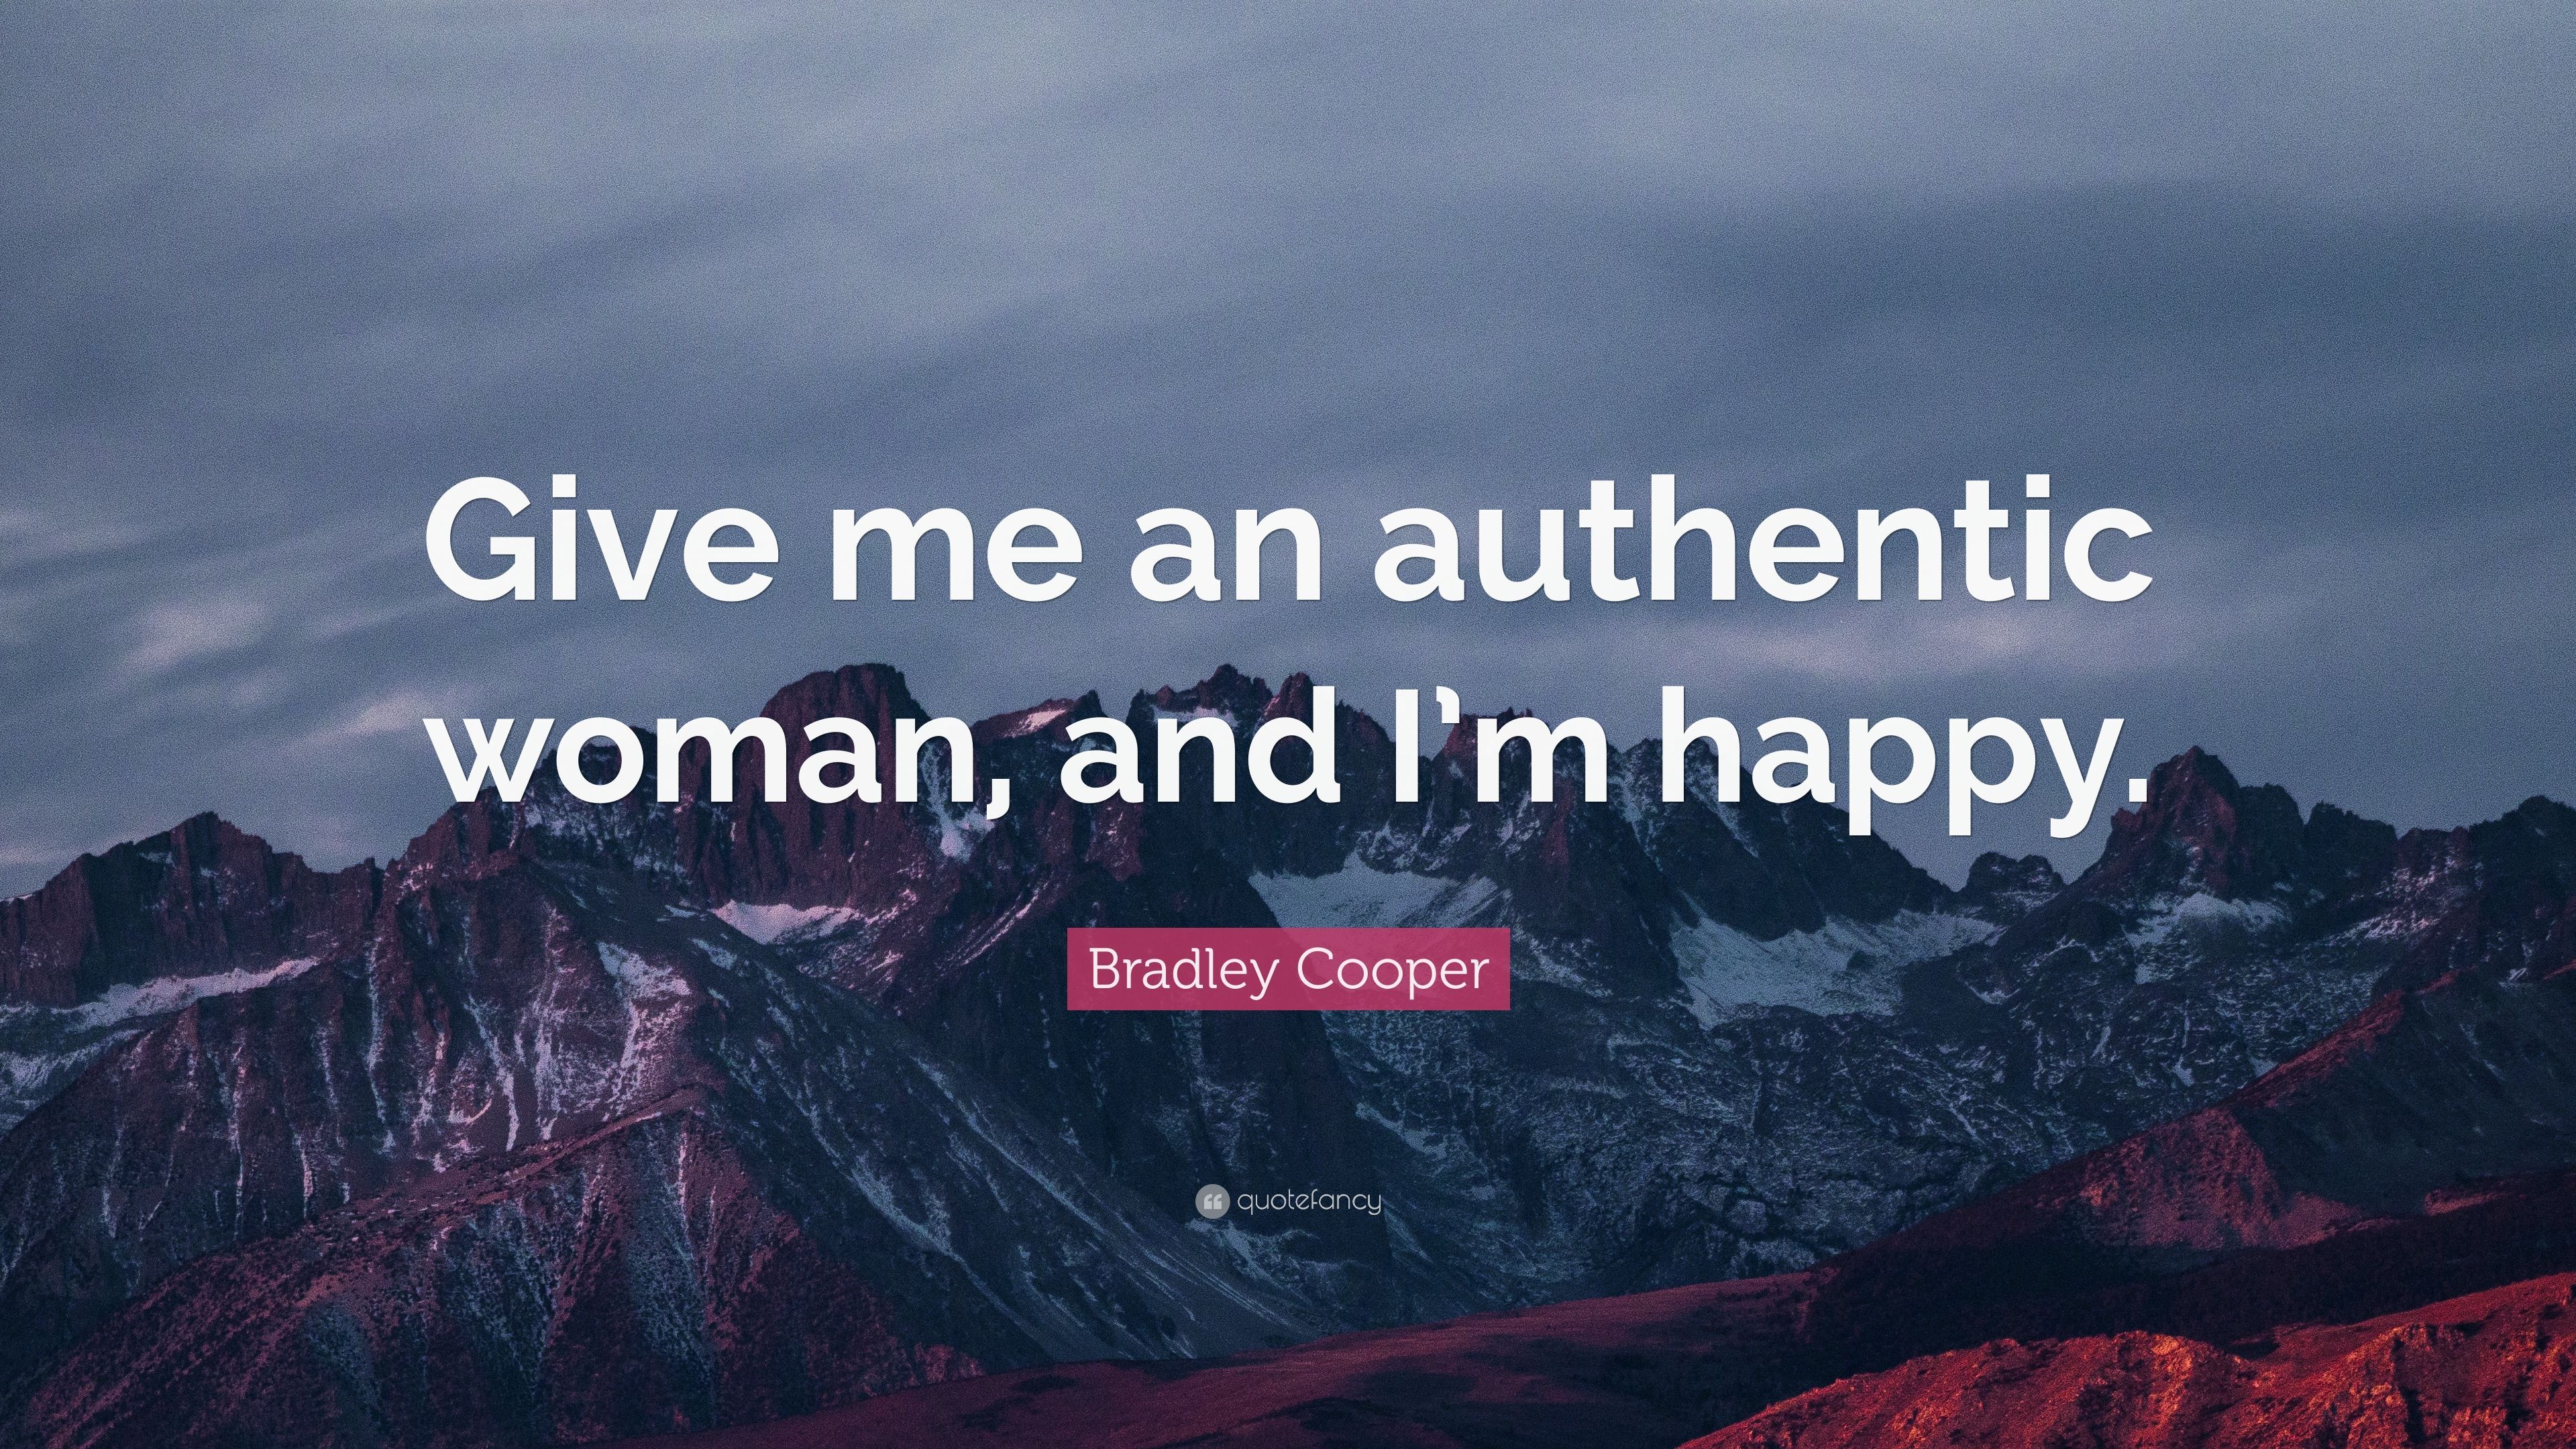 Bradley Cooper Quote: “Give me an authentic woman, and I'm happy.” (7 wallpaper)